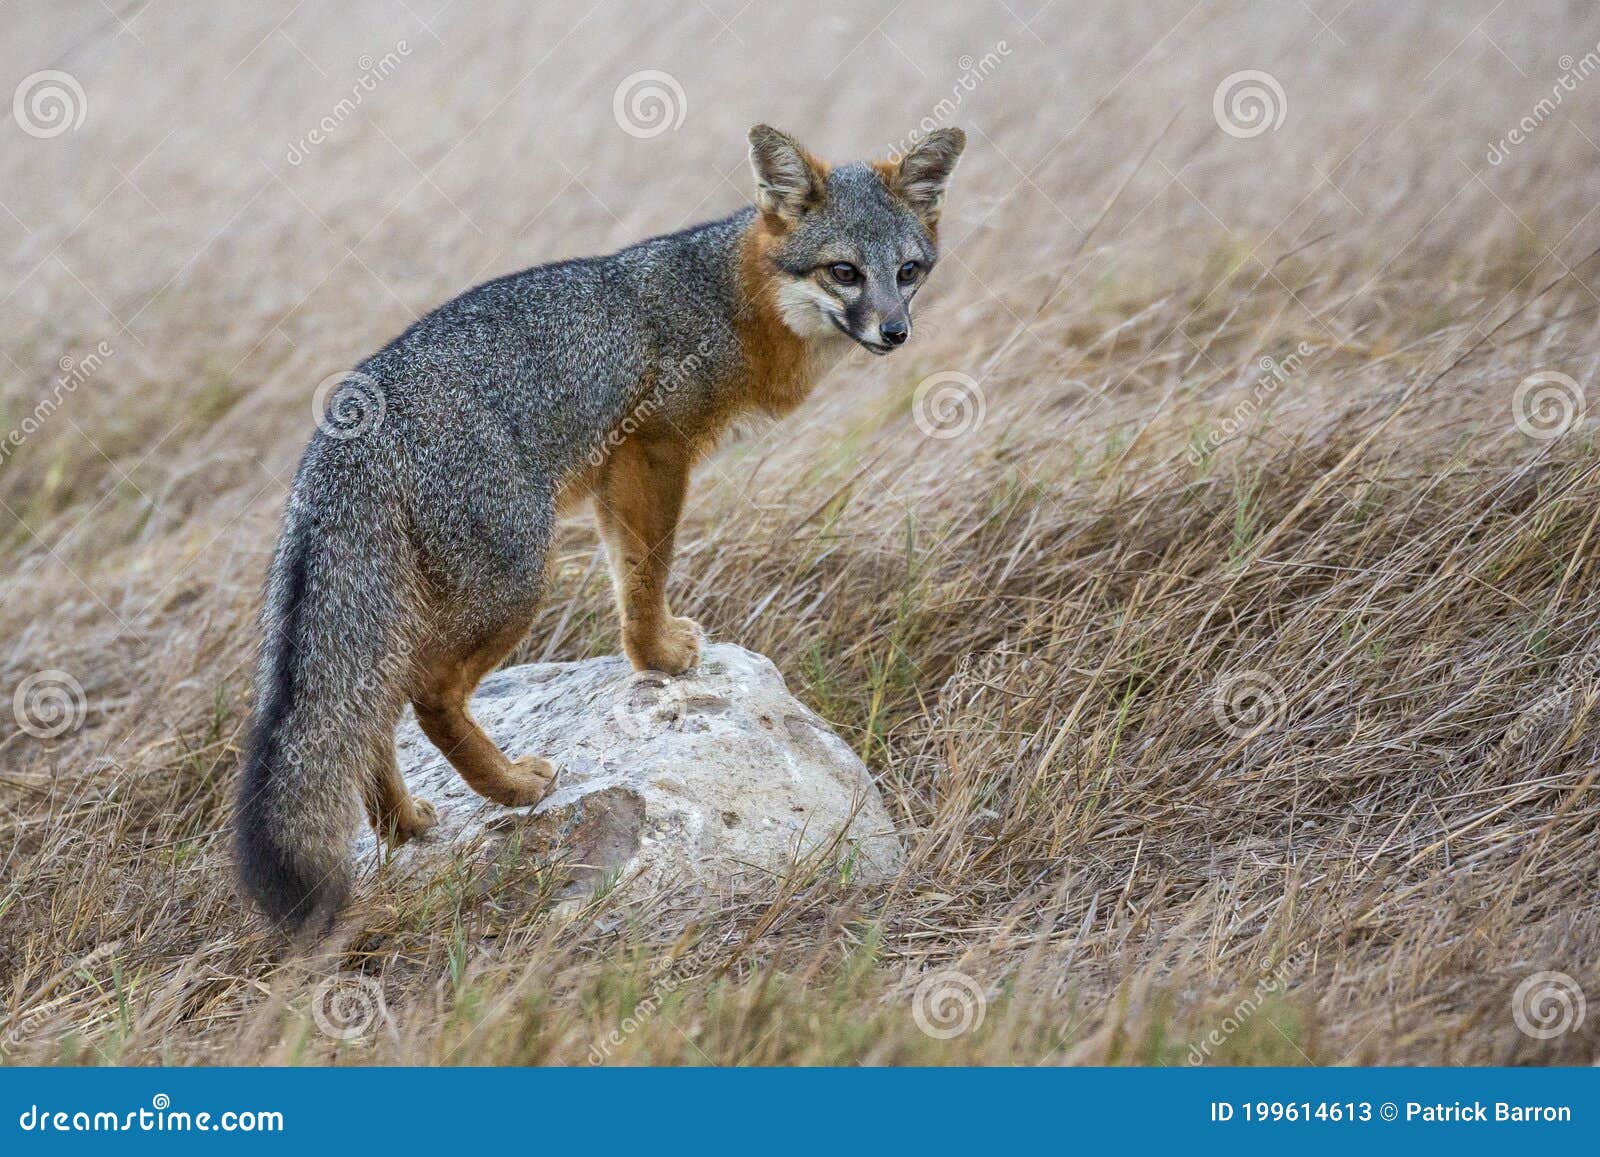 rare island fox in channel islands national park